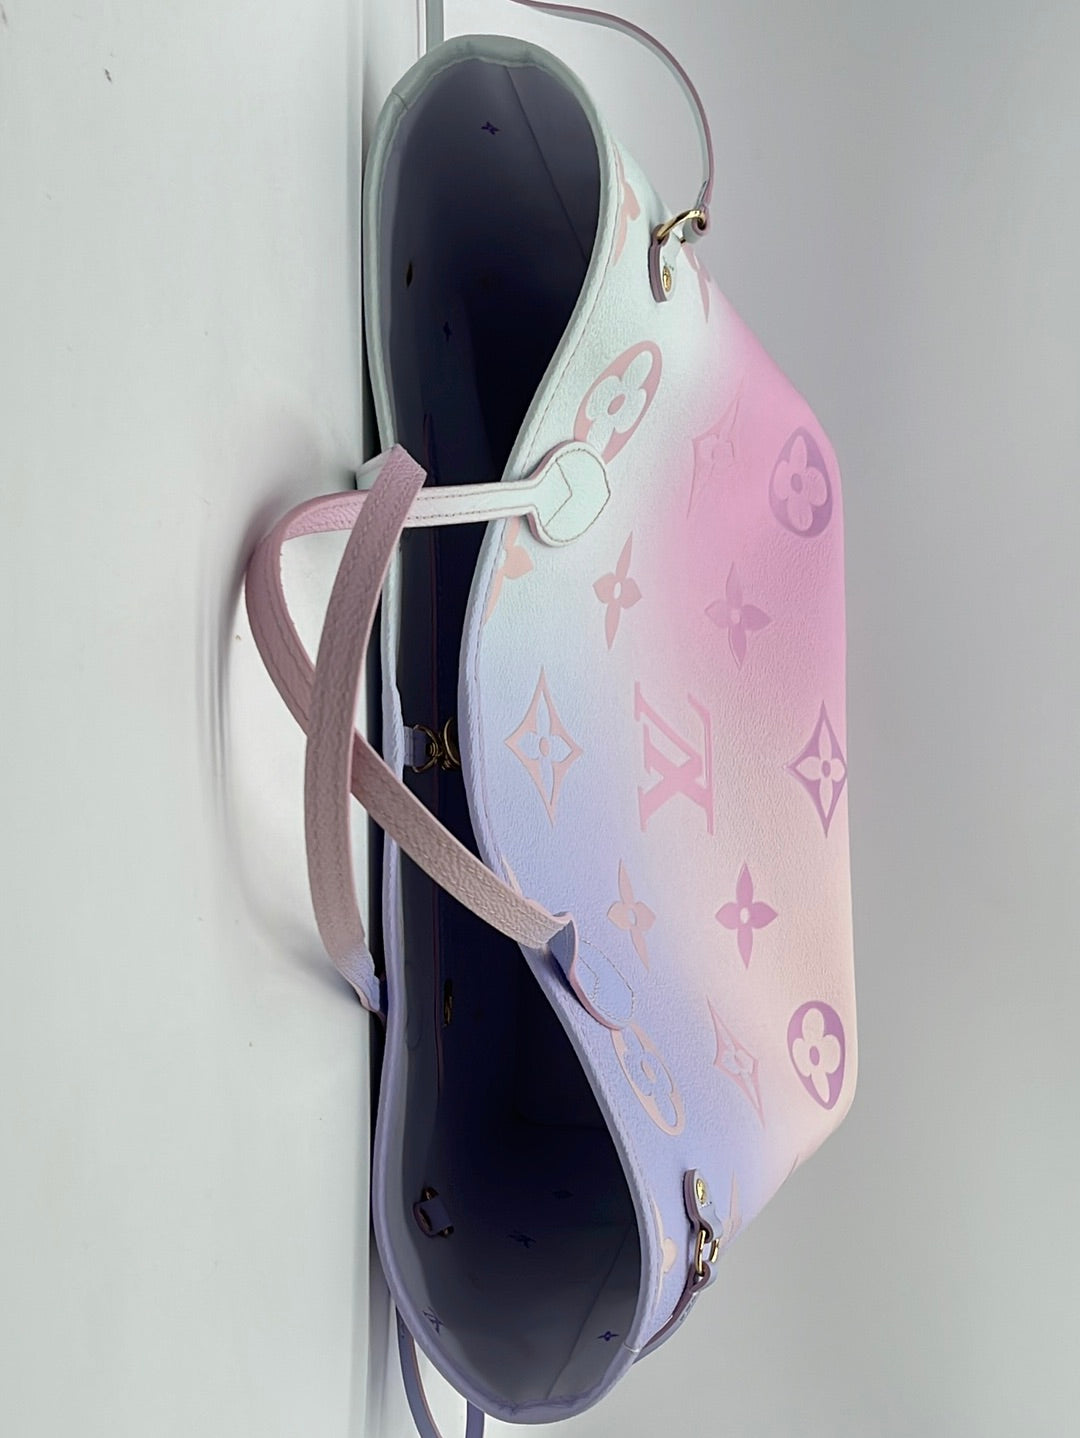 GIFTABLE Preloved LIMITED EDITION Louis Vuitton Sunrise Pastel Giant M –  KimmieBBags LLC